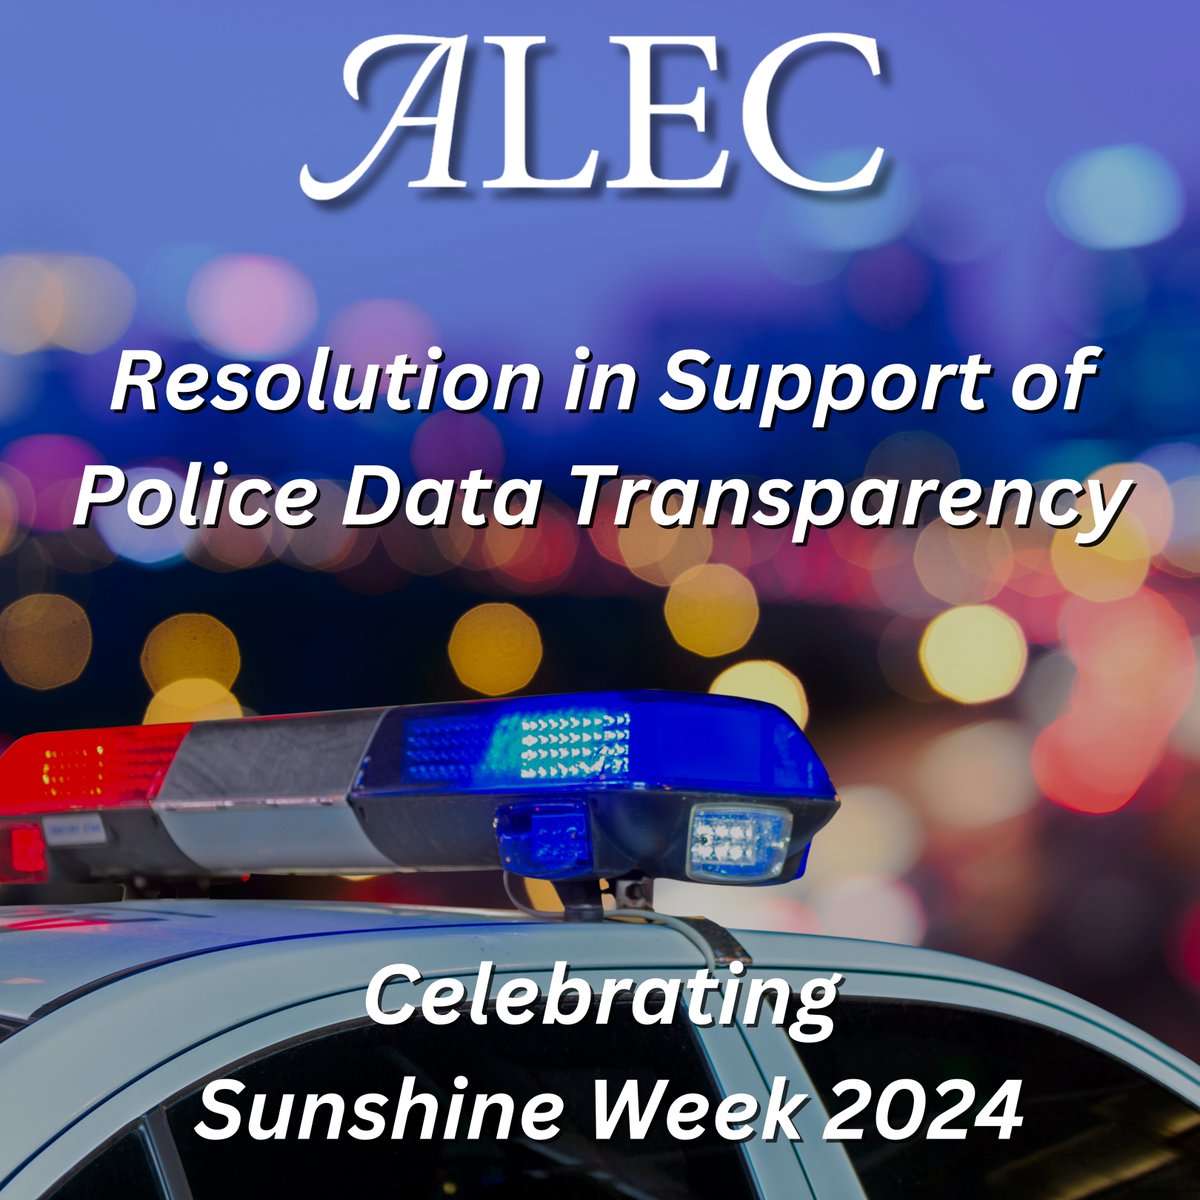 In celebration of Sunshine week, here are a few of our model policies that ensure transparency in taxation, education, health care, and criminal justice. #sunshineweek #transparency #education #housing #textbooks #healthcare #criminaljustice alec.org/article/alec-c…